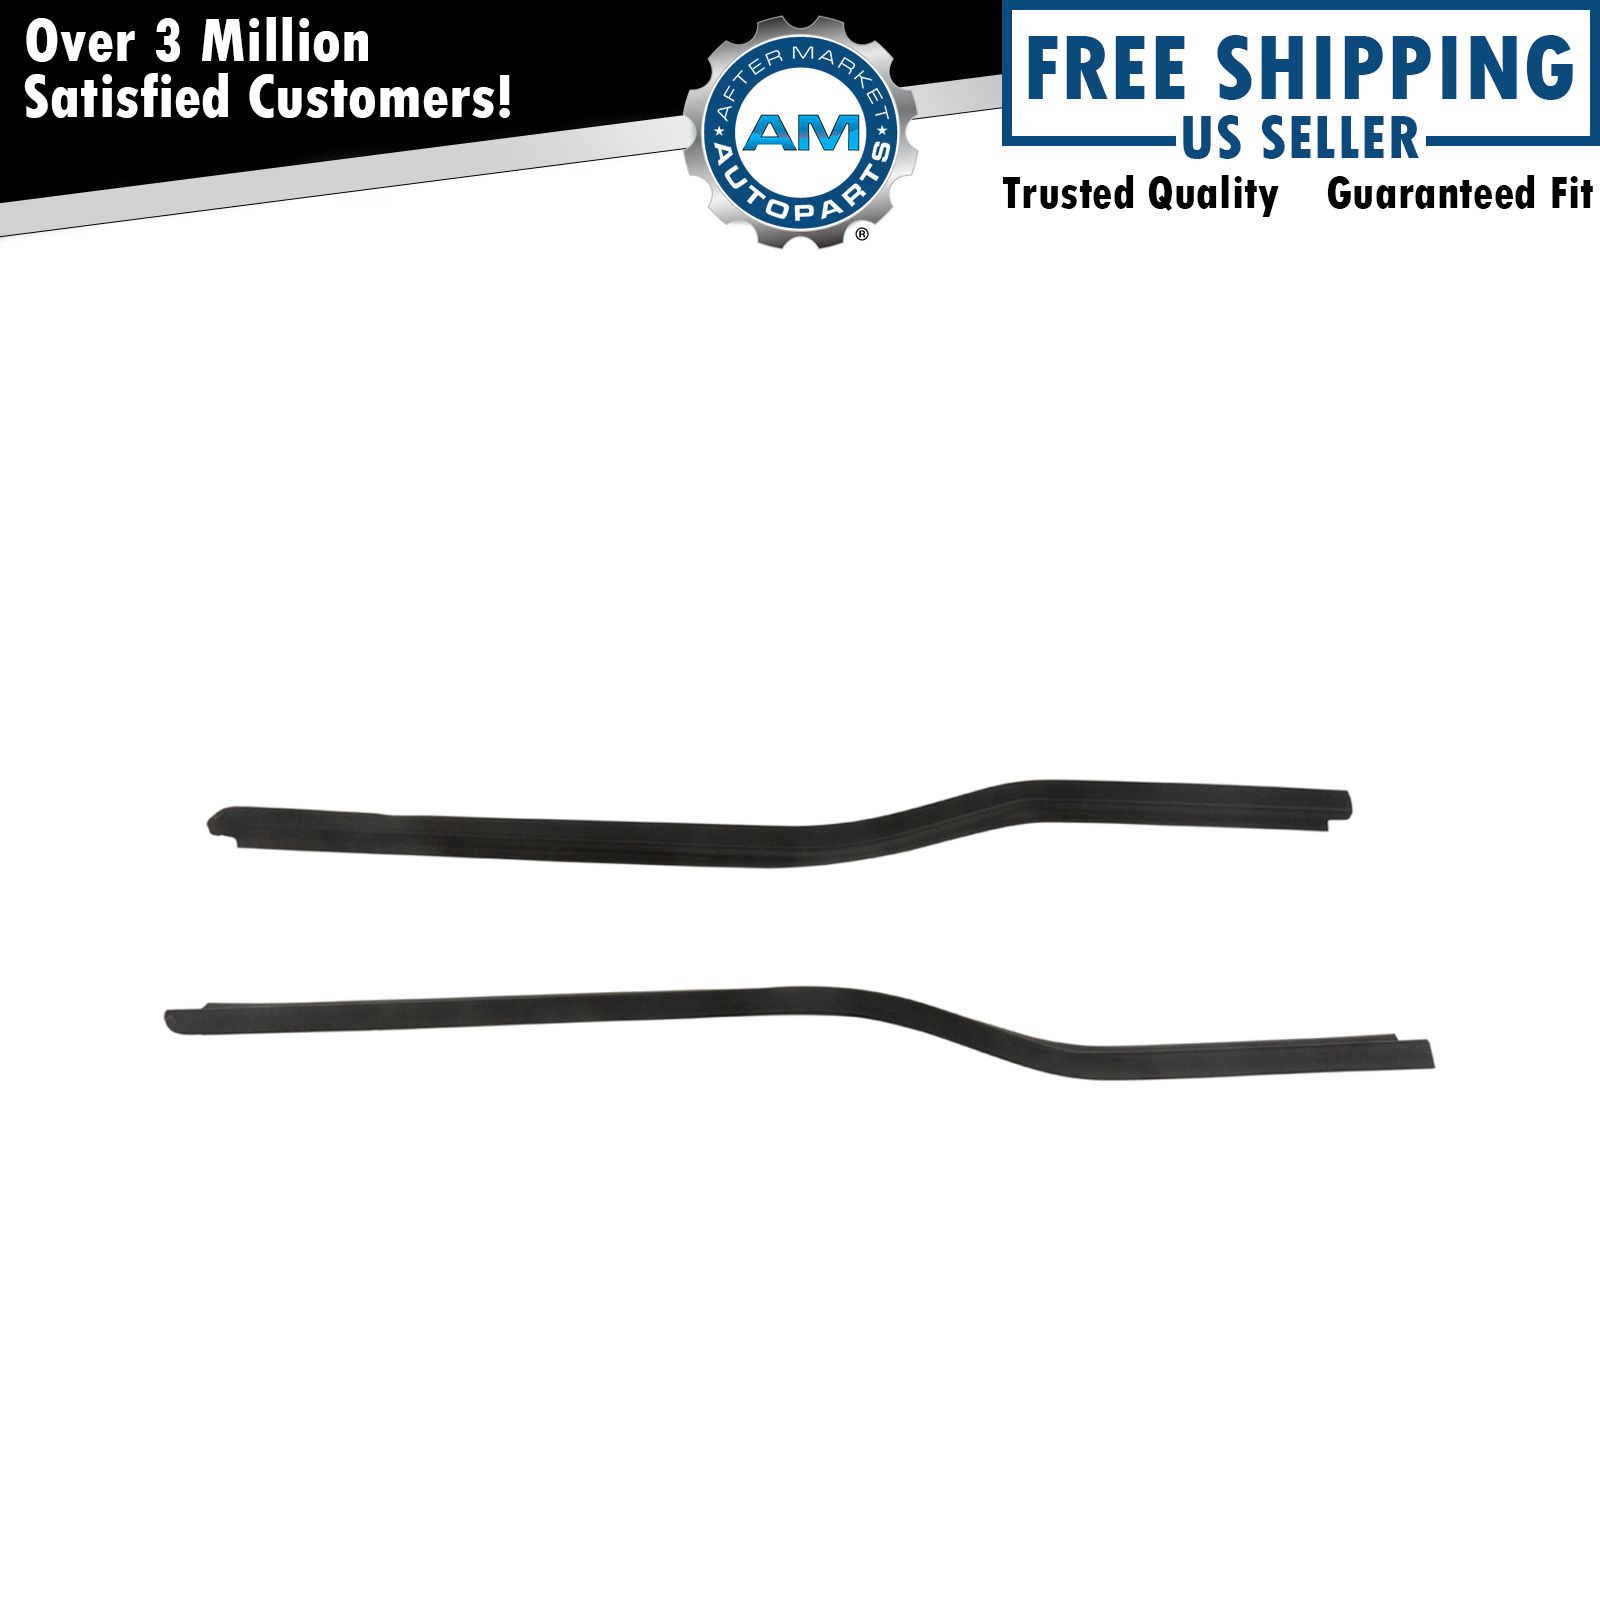 Front Outer Door Weatherstrip Seal Window Sweep LH RH Pair for Ford Truck